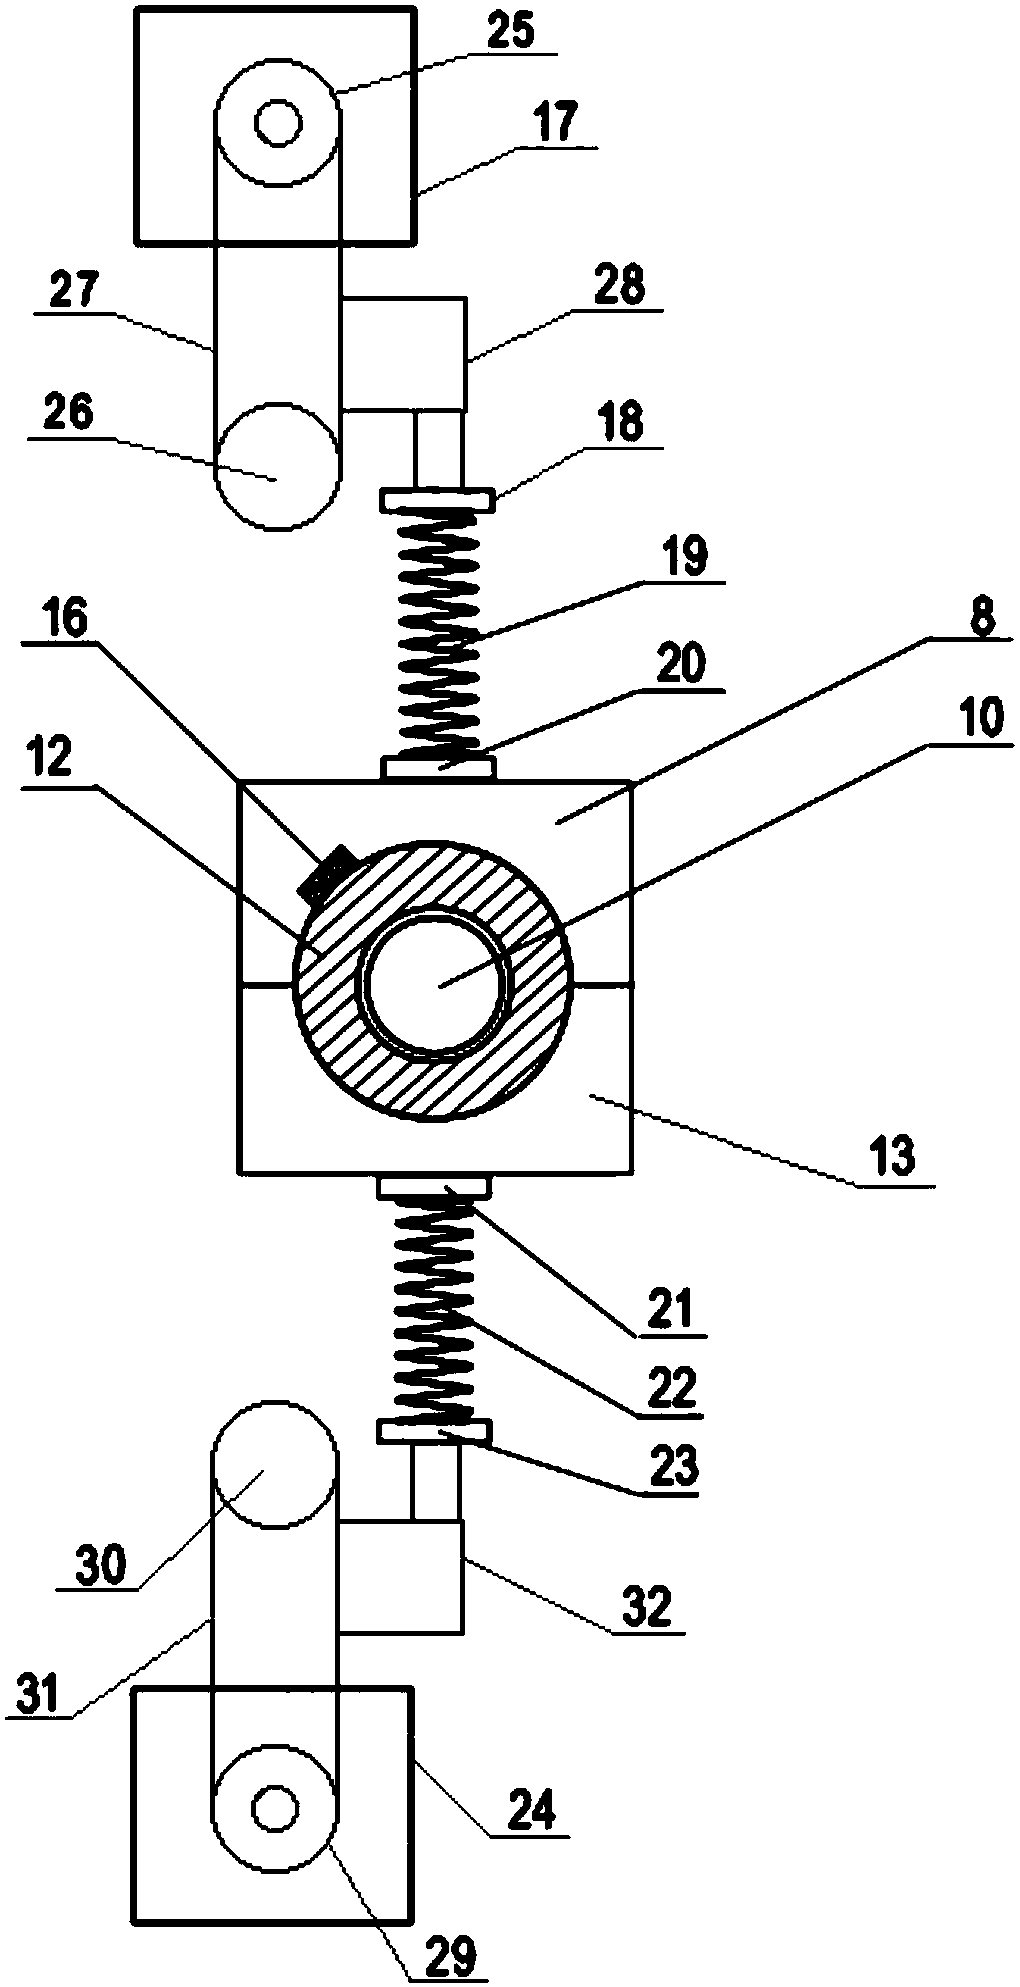 Antifriction bearing performance testing apparatus based on belt drive and being able to load alternating load